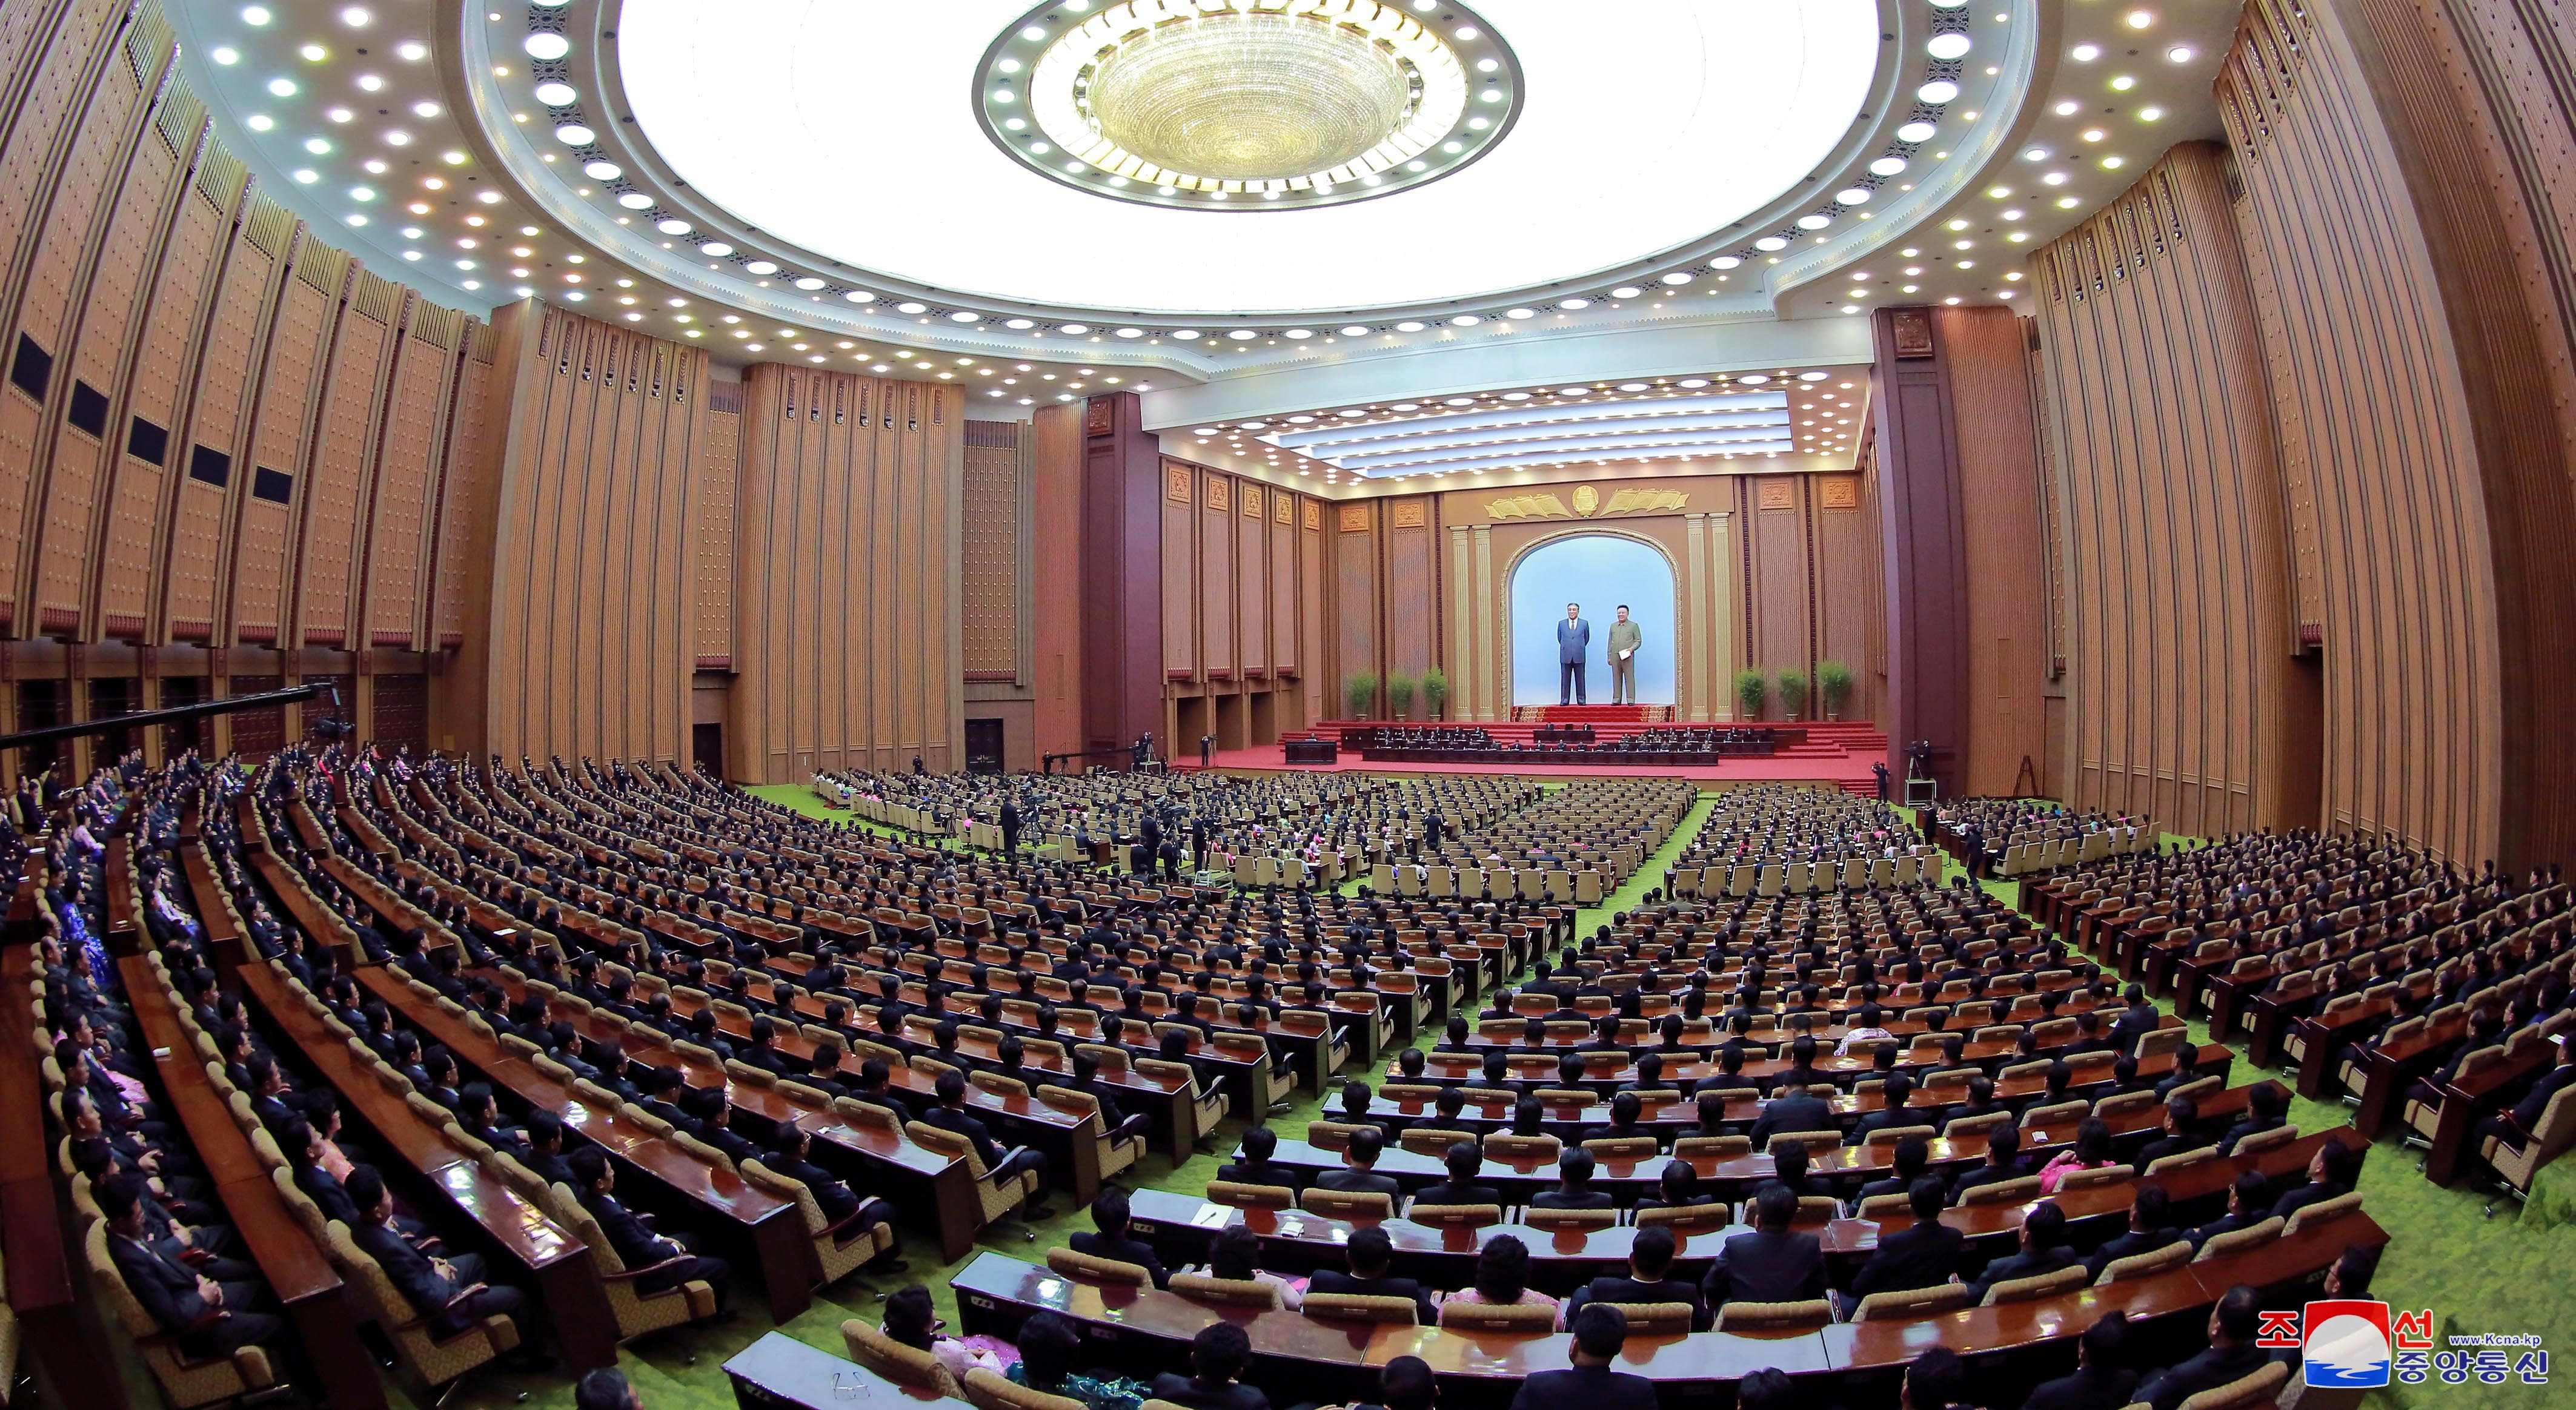 General view of the 14th Supreme People's Assembly of the Democratic People's Republic of Korea in Pyongyang